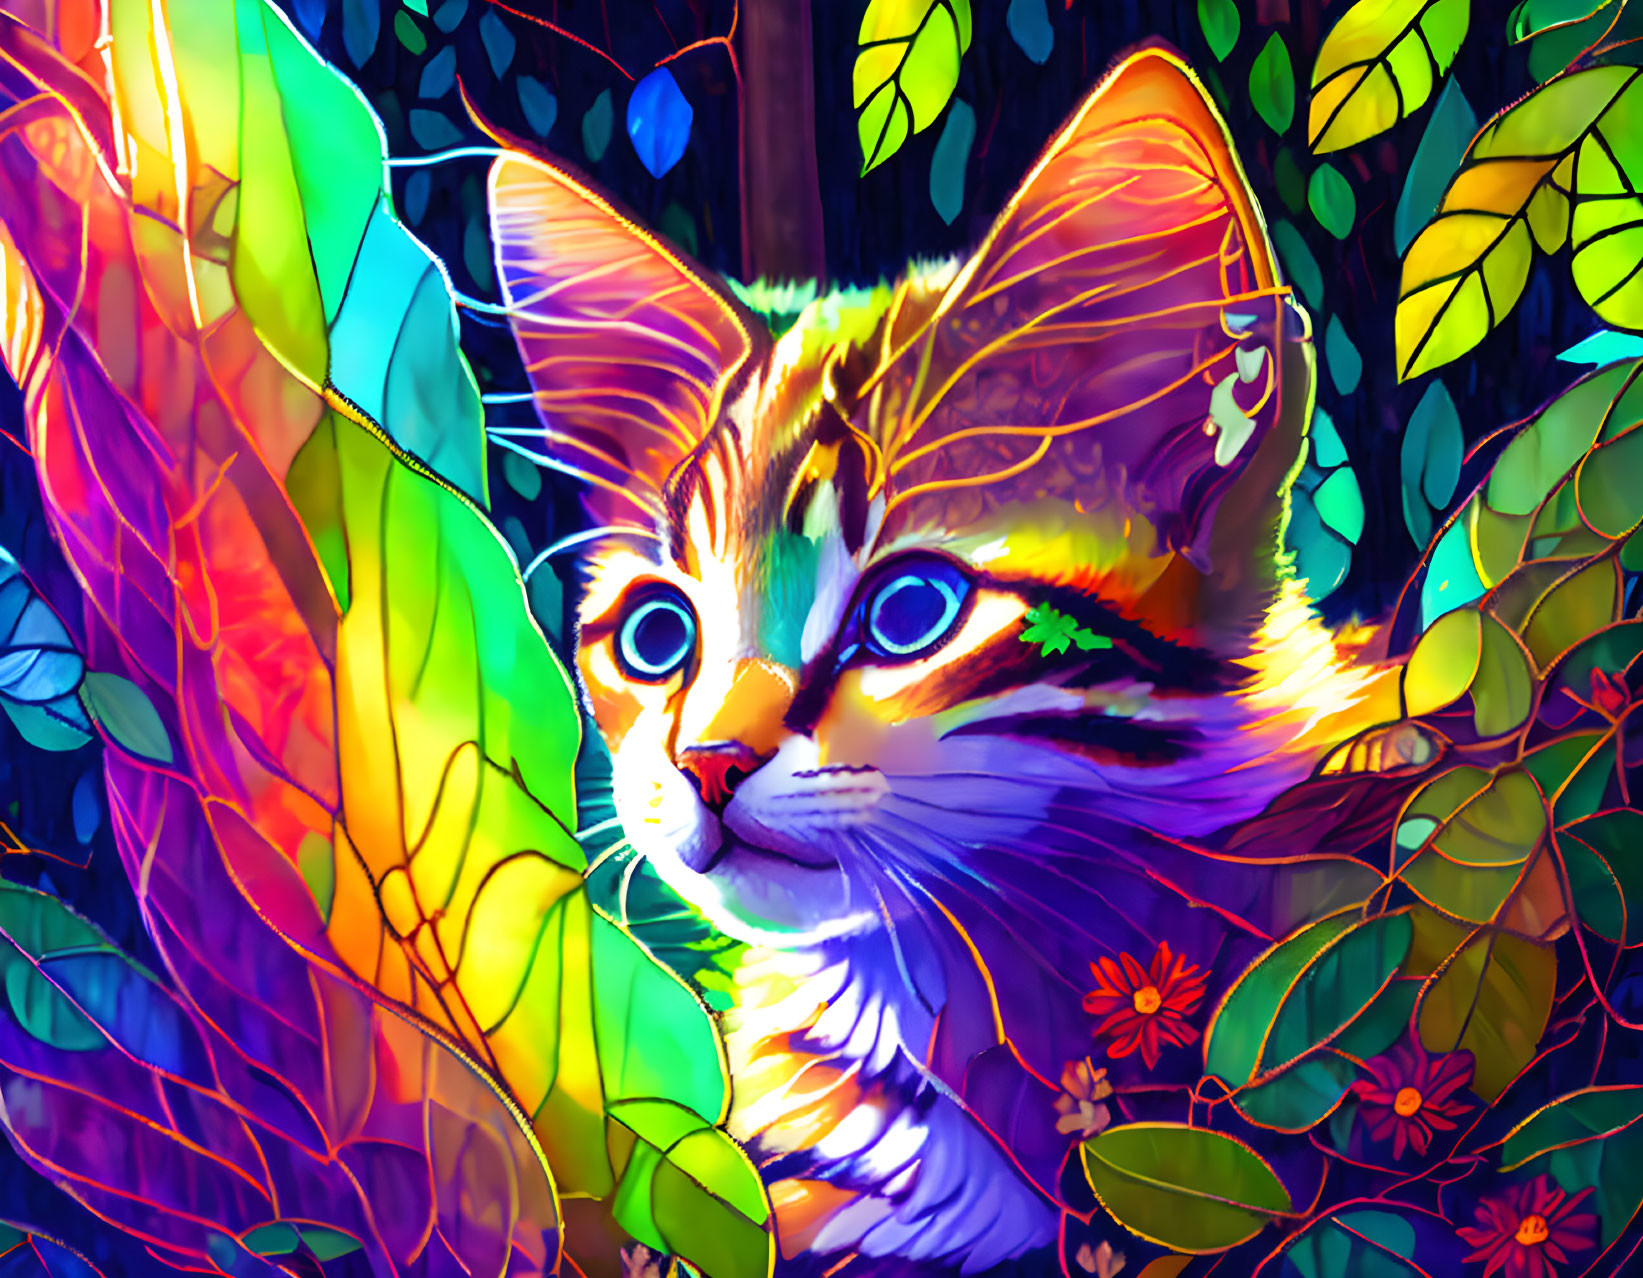 Colorful Digital Artwork: Cat with Vibrant Hues and Leaf Patterns